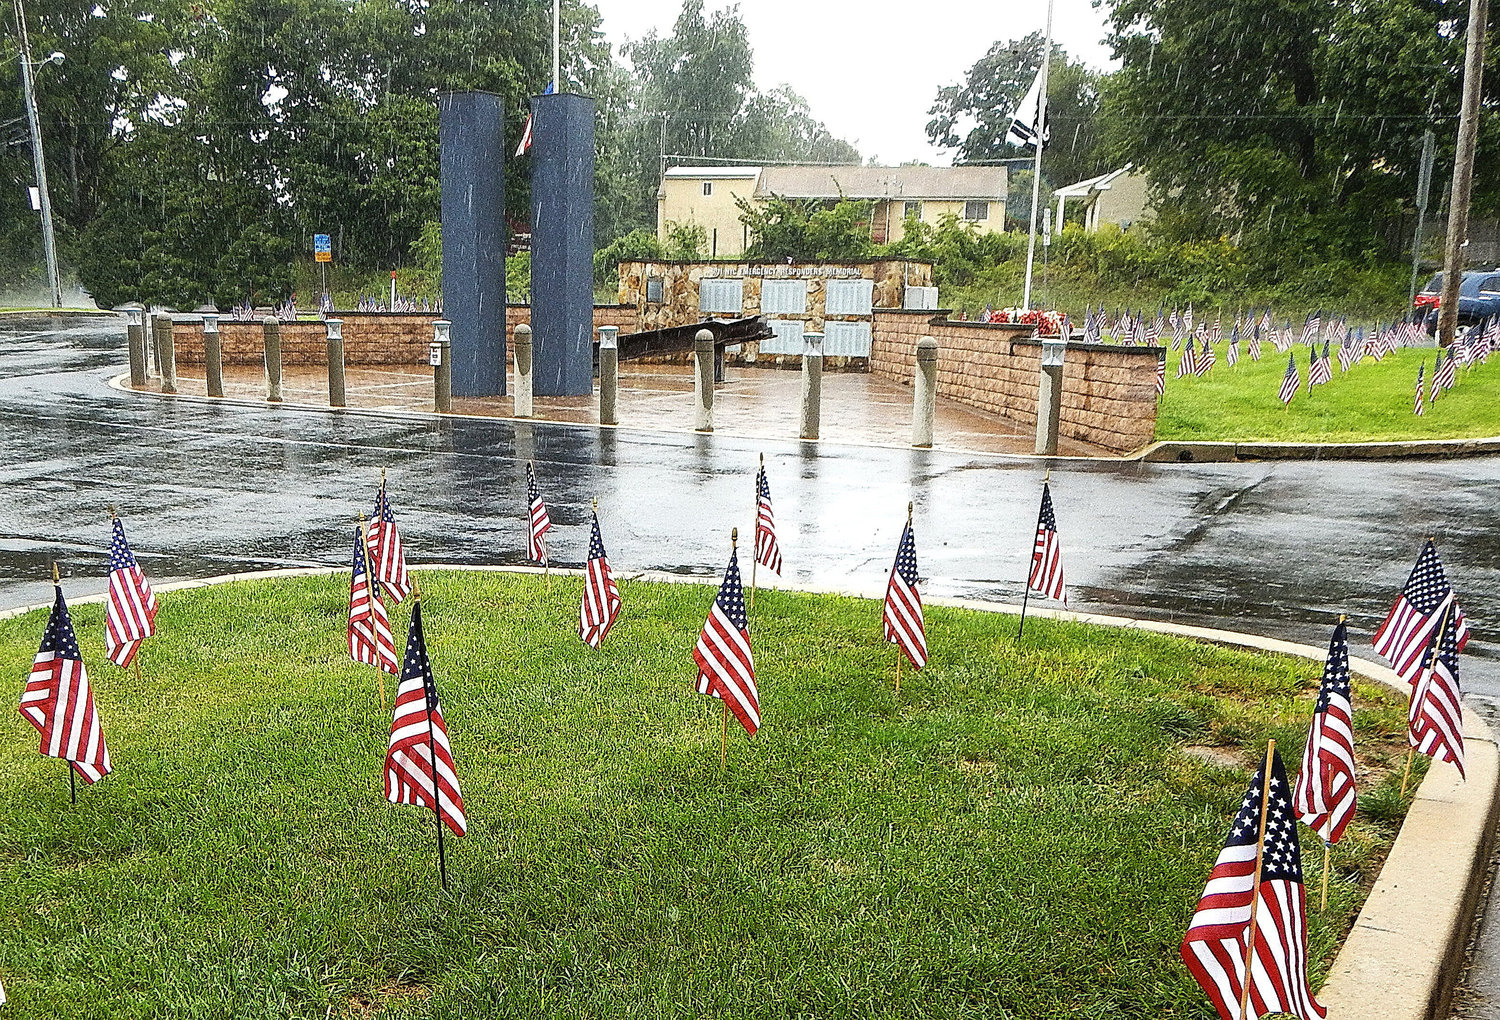 The rain pours down on the Hartsville Fire Company’s 9/11 display, consisting of 403 American Flags and models of the Twin Towers.